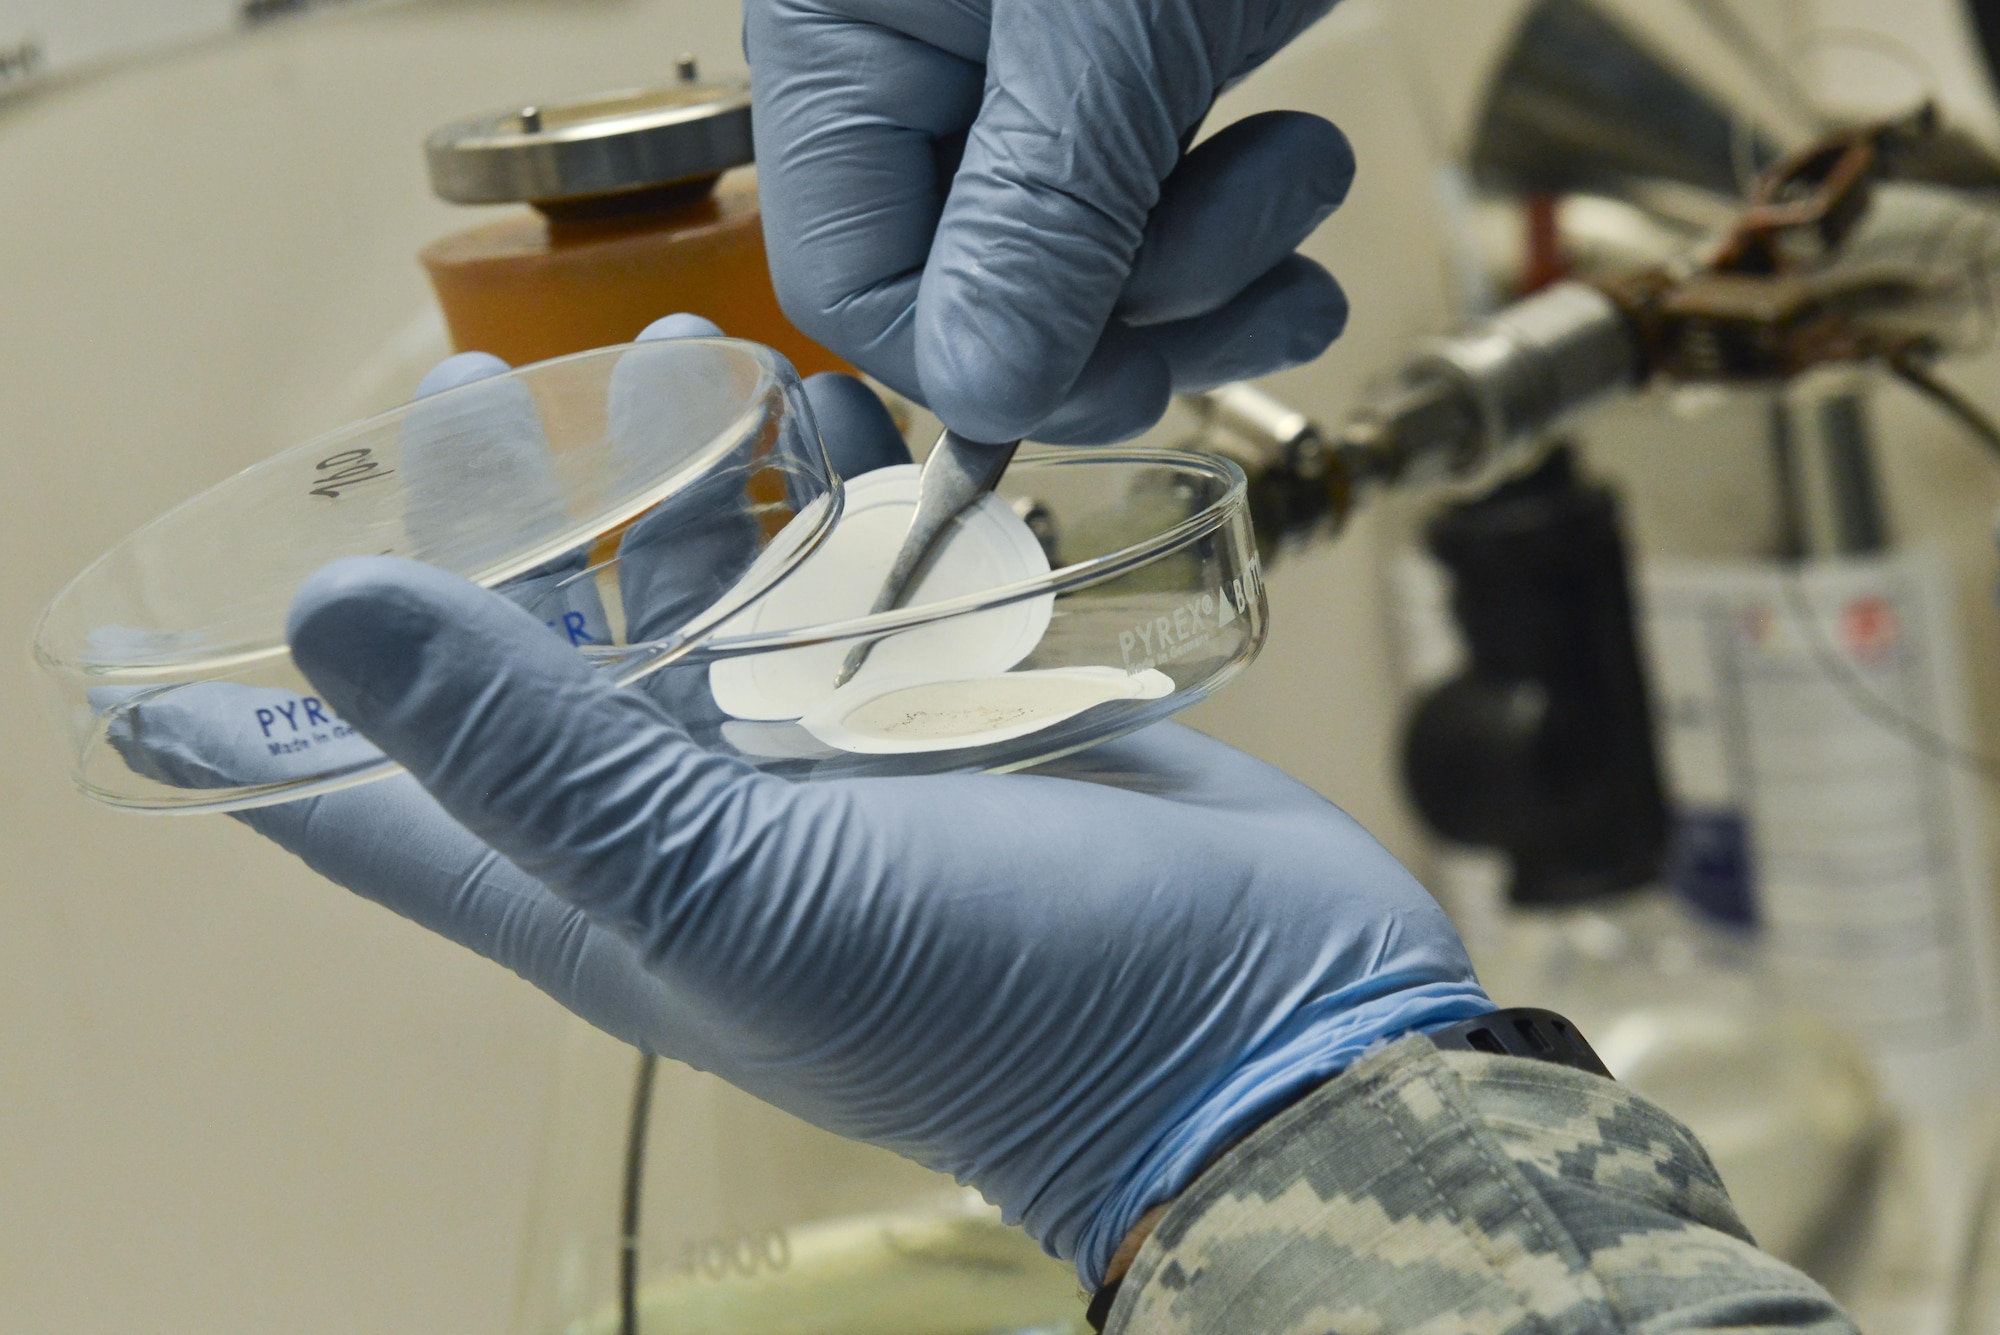 Staff Sgt. David Ramirez, 379th Expeditionary Logistic Readiness fuels laboratory, removes two filters that help separate any debris that is caught in the fuel during routine testing August 18, 2015 at Al Udeid Air Base, Qatar. The base fuels laboratory at Al Udeid tests all petroleum that is used in aircraft, vehicles and generators throughout the installation to safeguard its quality, performance and safety. (U.S. Air Force photo/ Staff Sgt. Alexandre Montes)